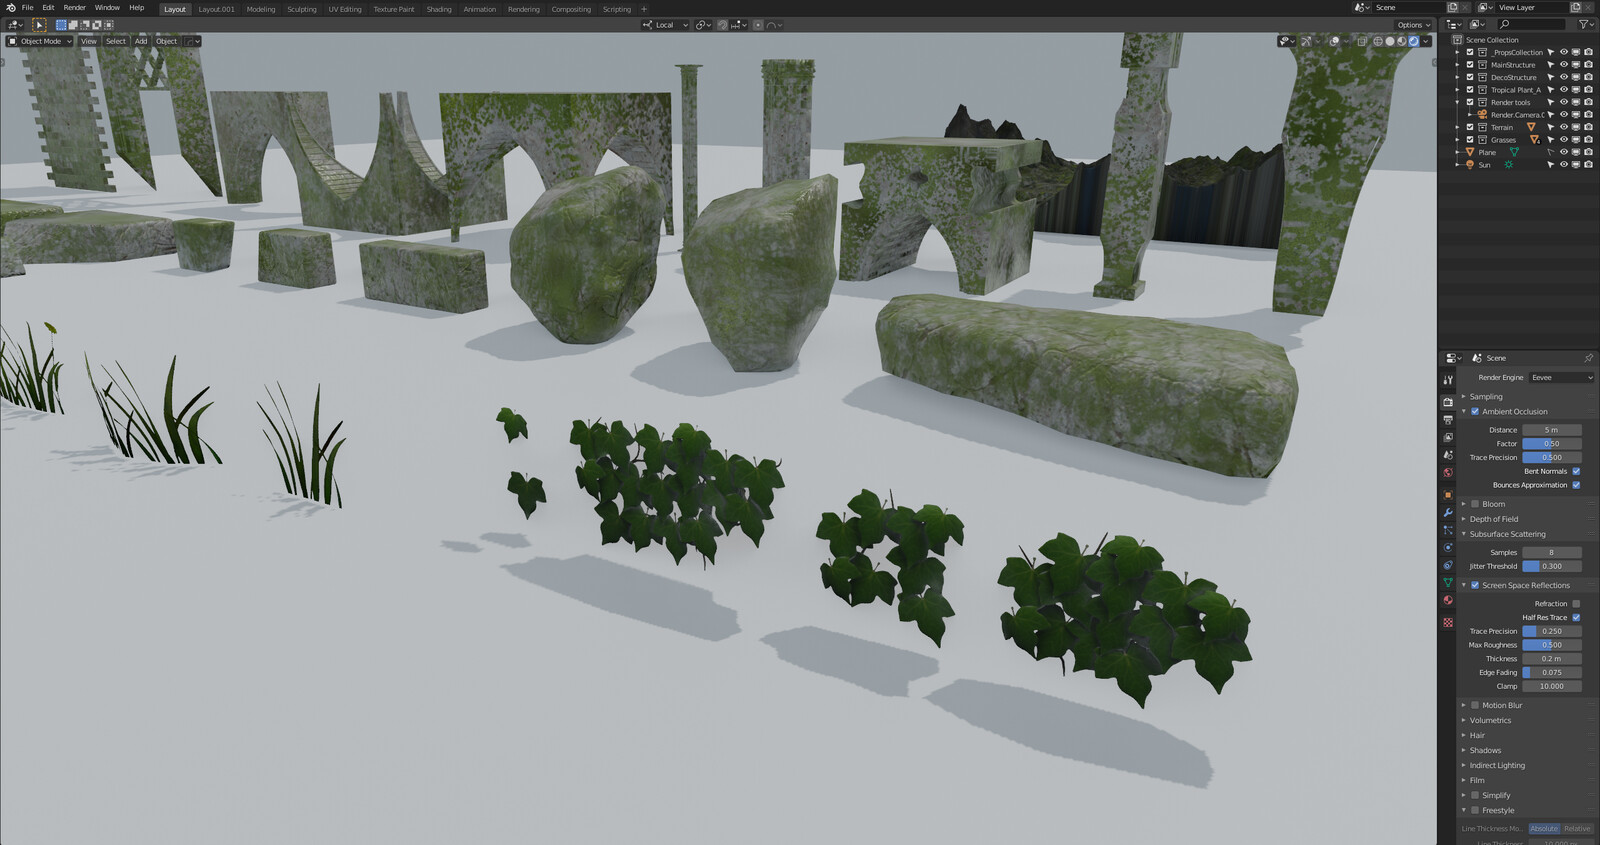 Enchanted project
Working Progress
Assets